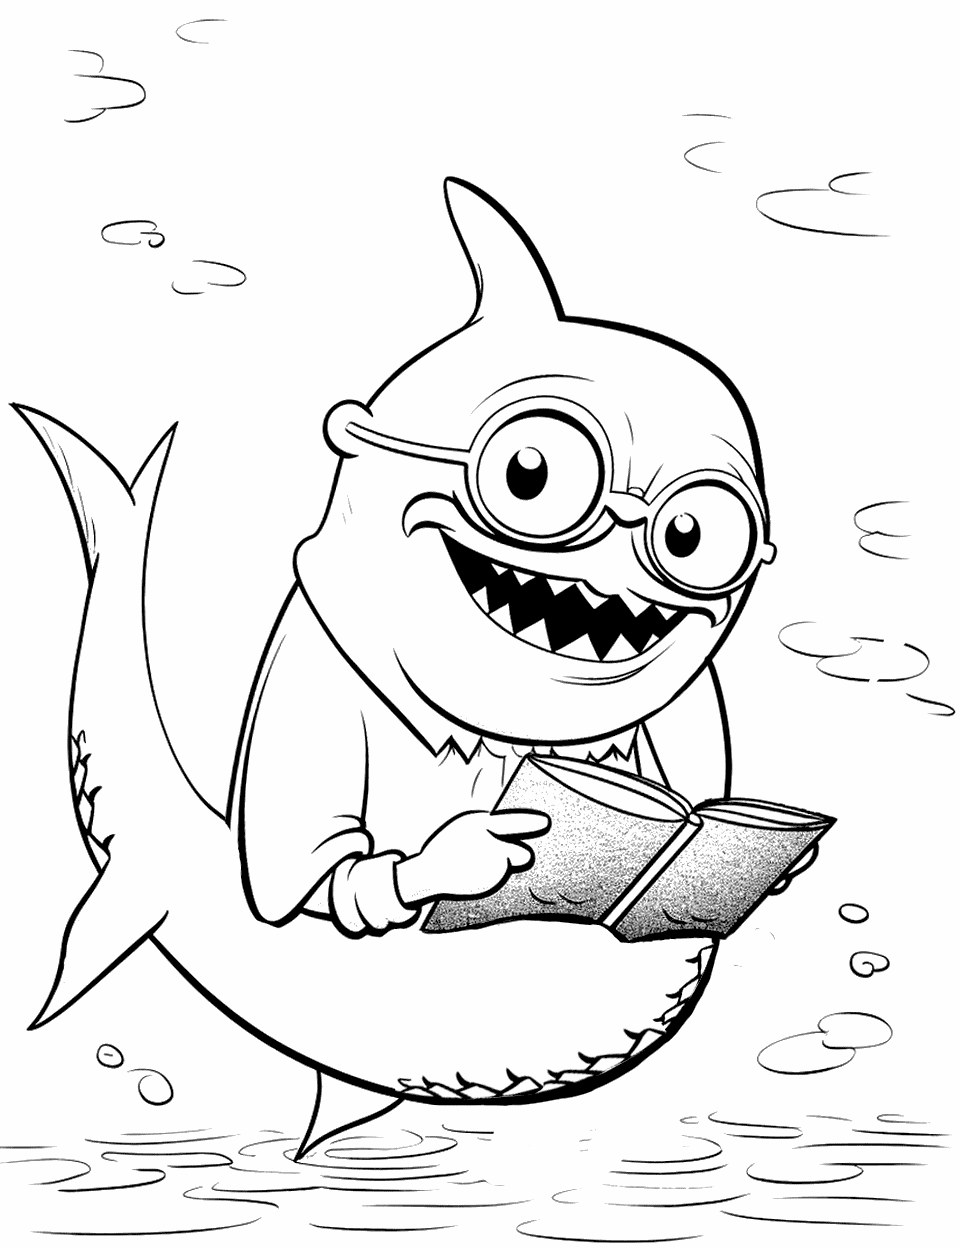 Grandpa Shark’s Day Out Baby Shark Coloring Page - Grandpa Shark wearing glasses and reading a newspaper underwater.